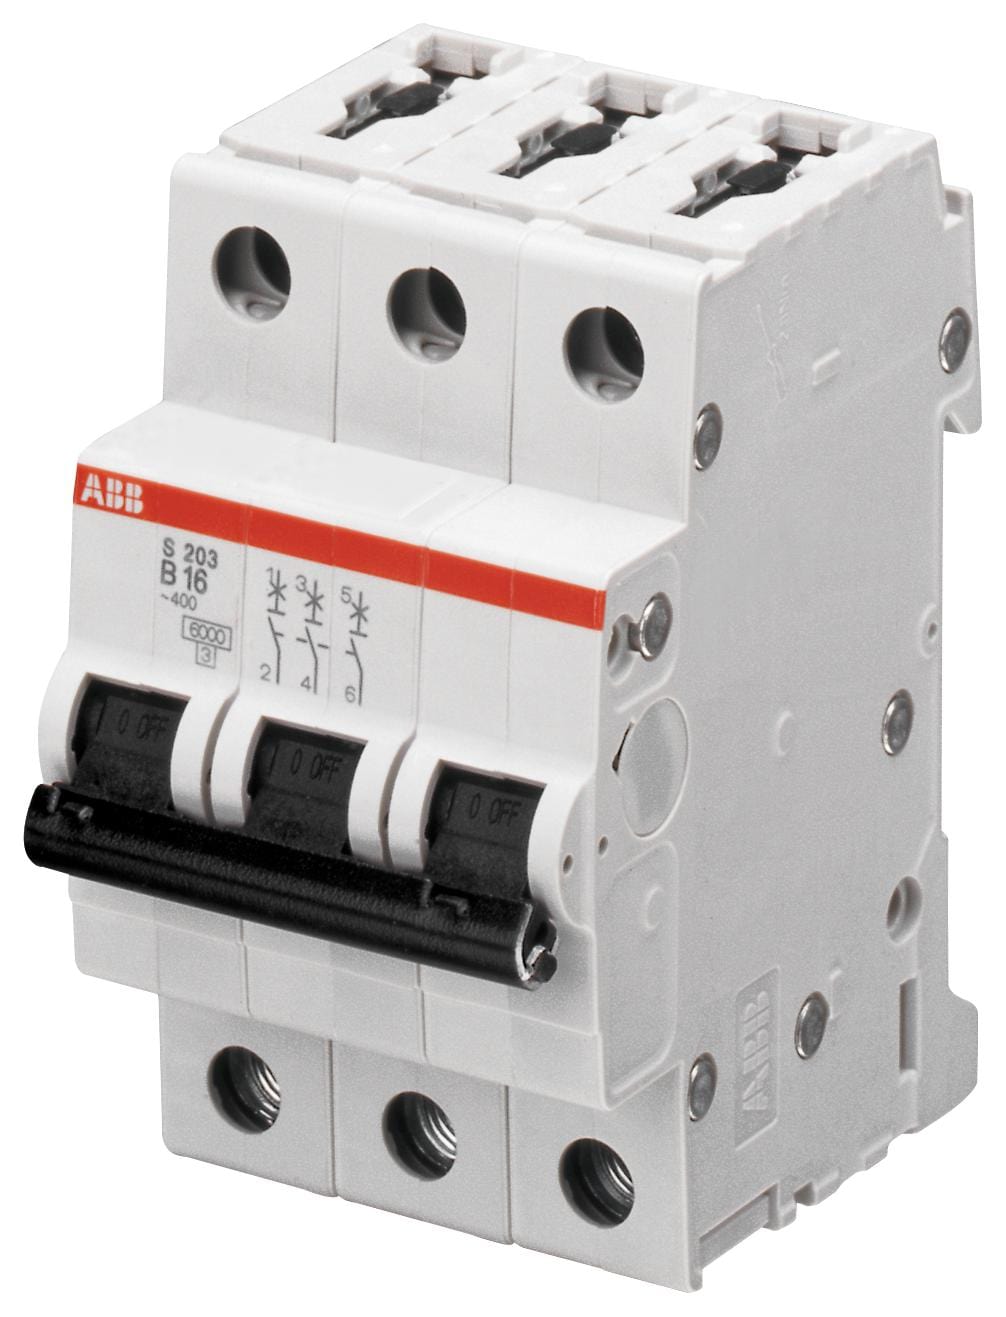 ABB Thermal Magnetic S203-D32 CIRCUIT BREAKER, THERMAL MAG, 3 POLE ABB 2492843 S203-D32